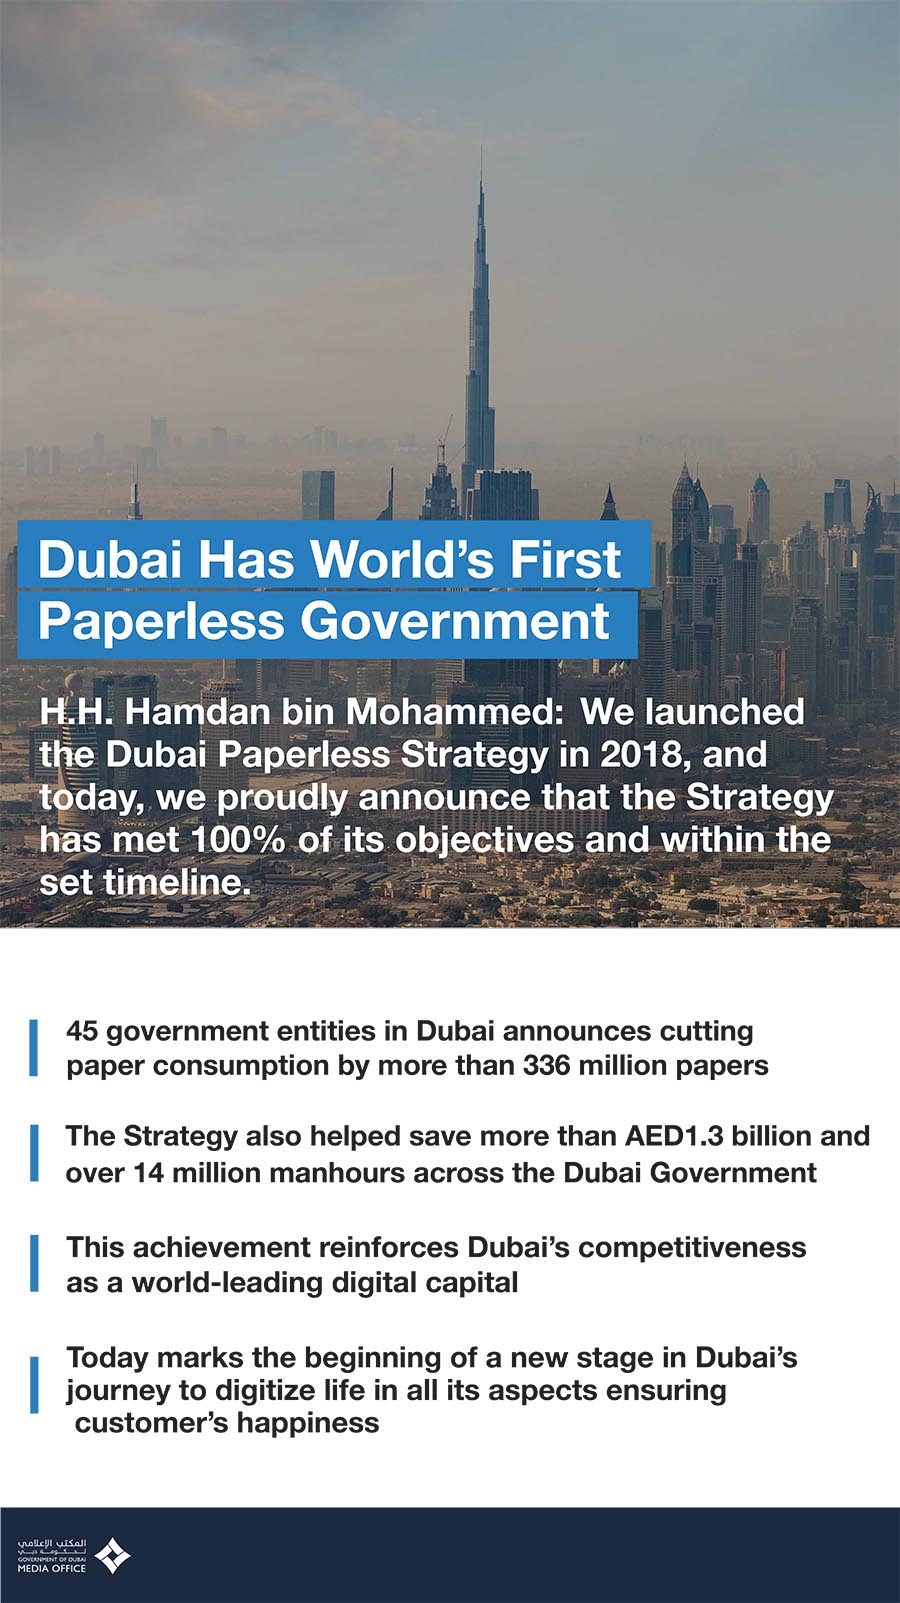 Image for Dubai Becomes The World’s First Paperless Government